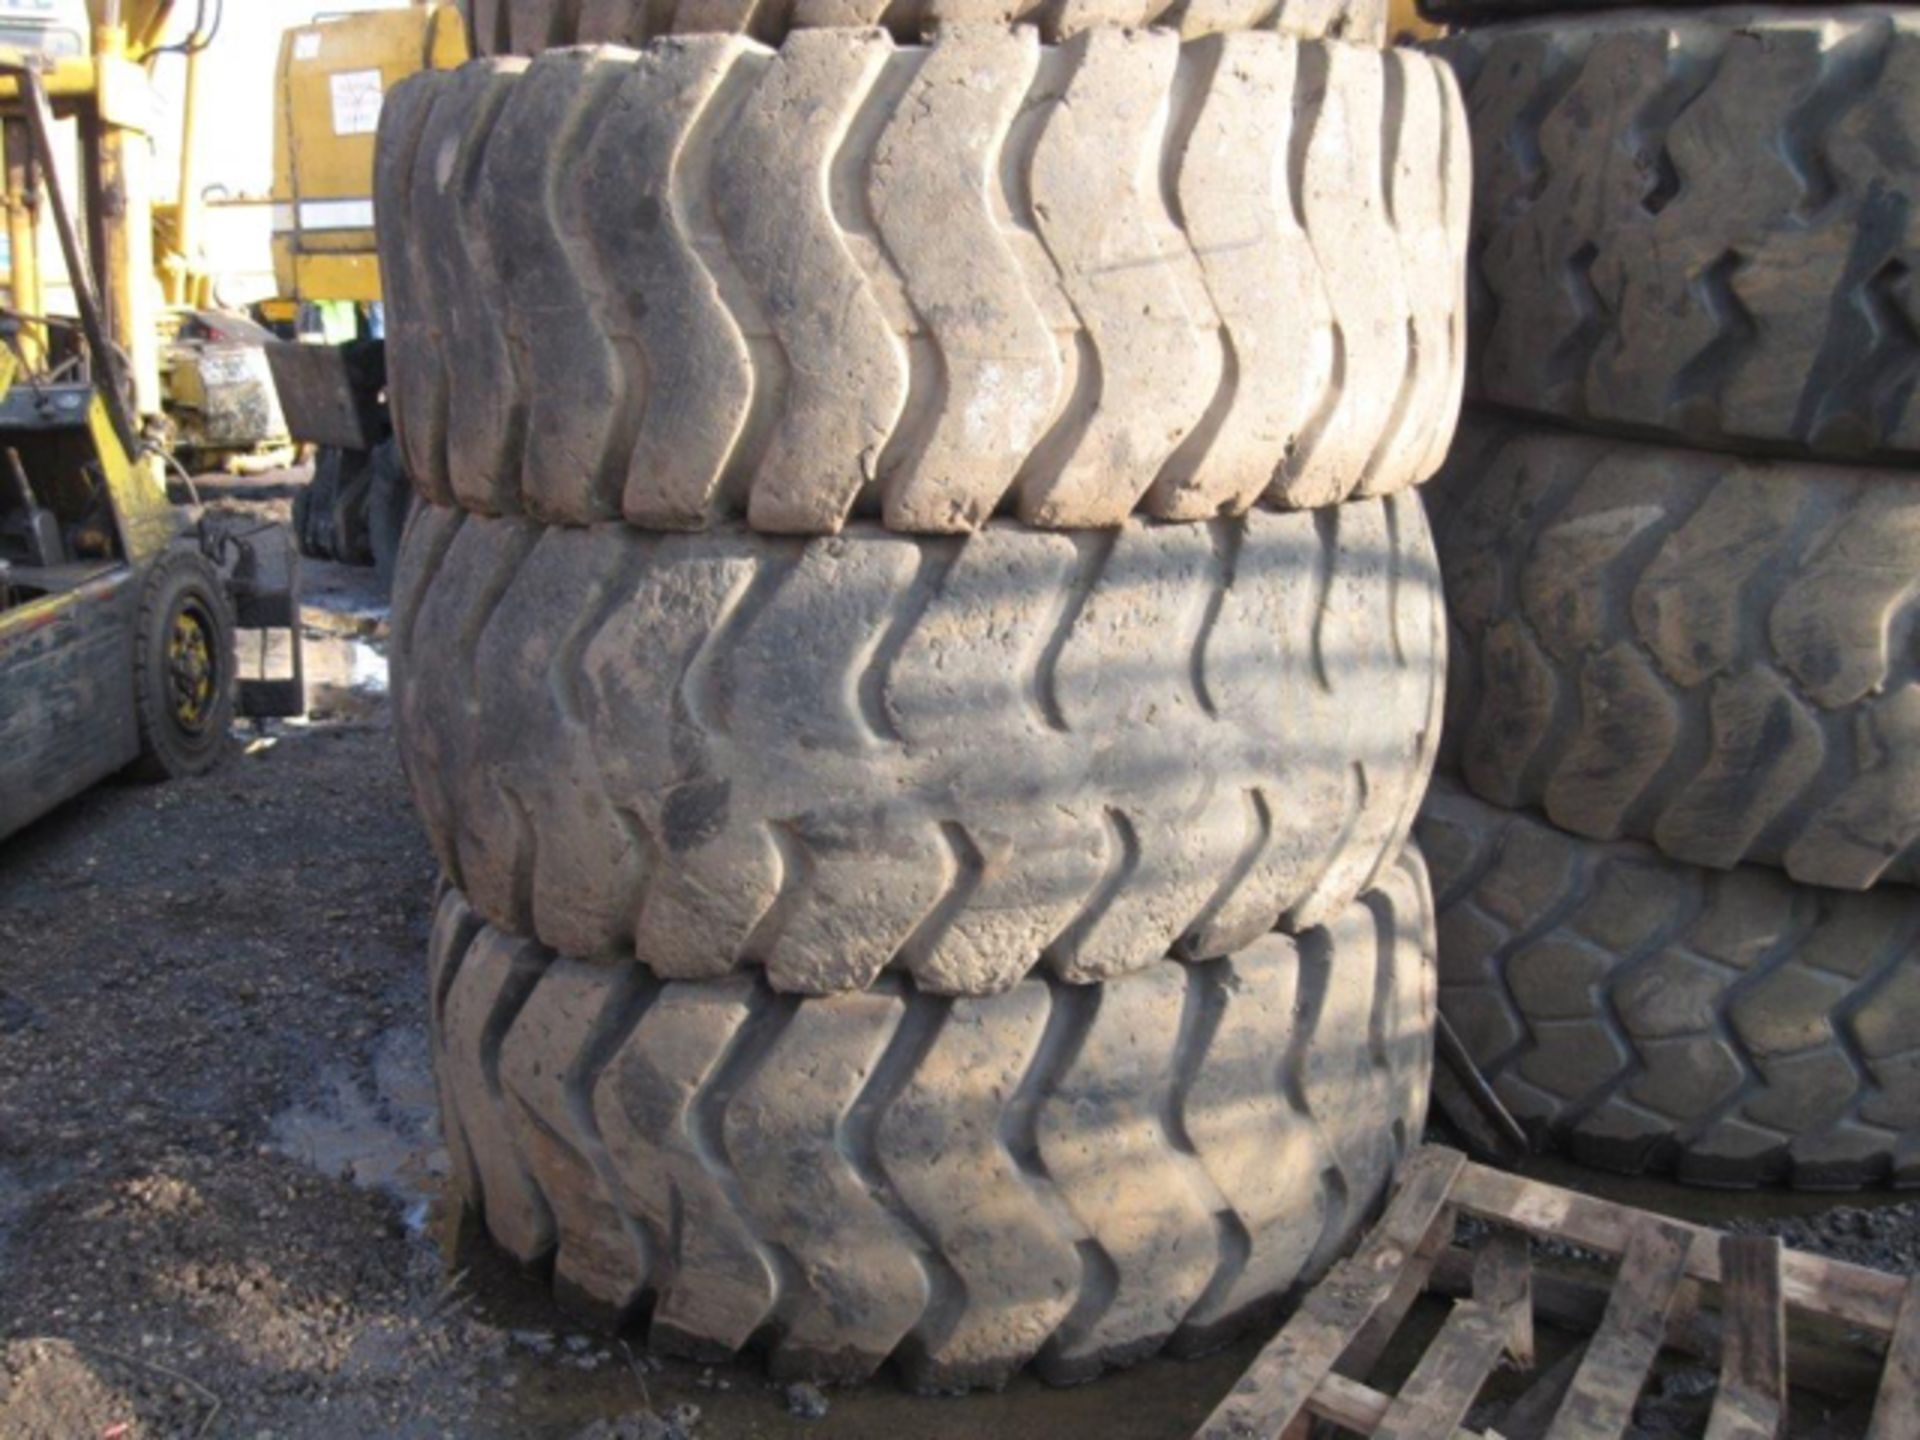 26.5 x 25 Tyres x 2 2 Good 26.5 x 25 tyres (top and bottom in pile)